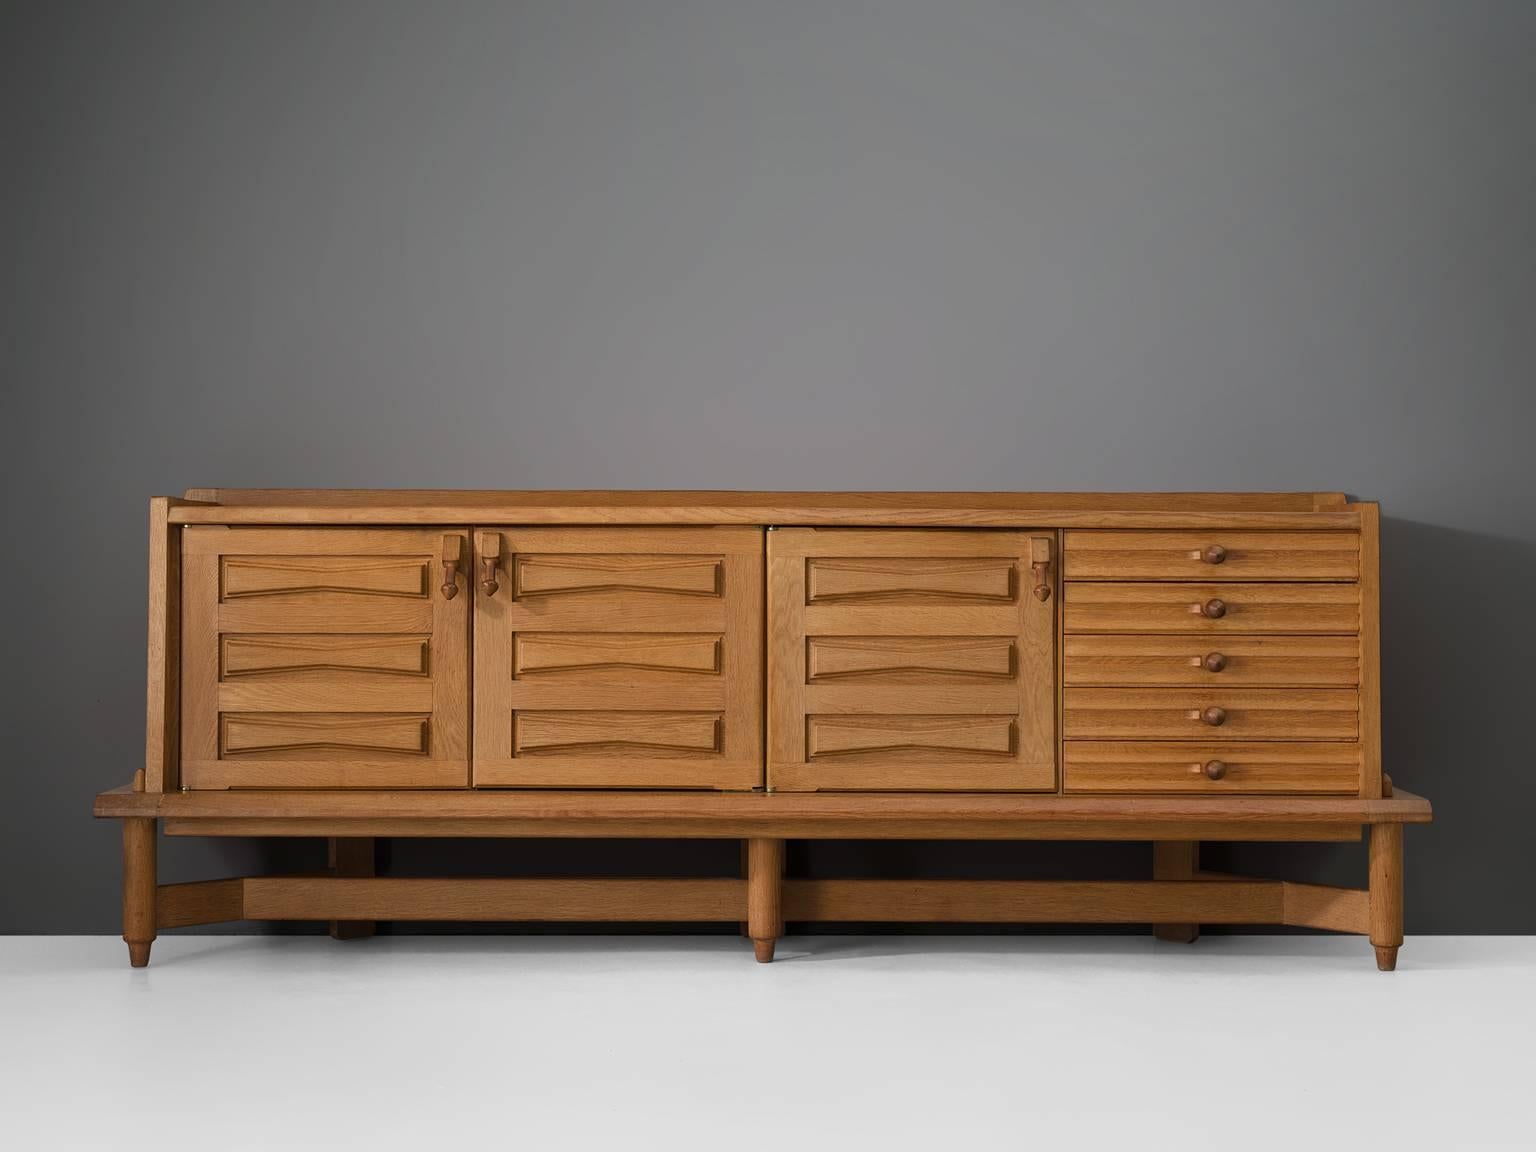 Credenza 'Saint-Veran', in oak and ceramic, by Guillerme et Chambron for Votre Maison, France, 1960s. 

Characteristic sideboard in solid oak. This cabinet holds the characteristics of the French designer duo Jacques Chambron (1914-2001) and Robert